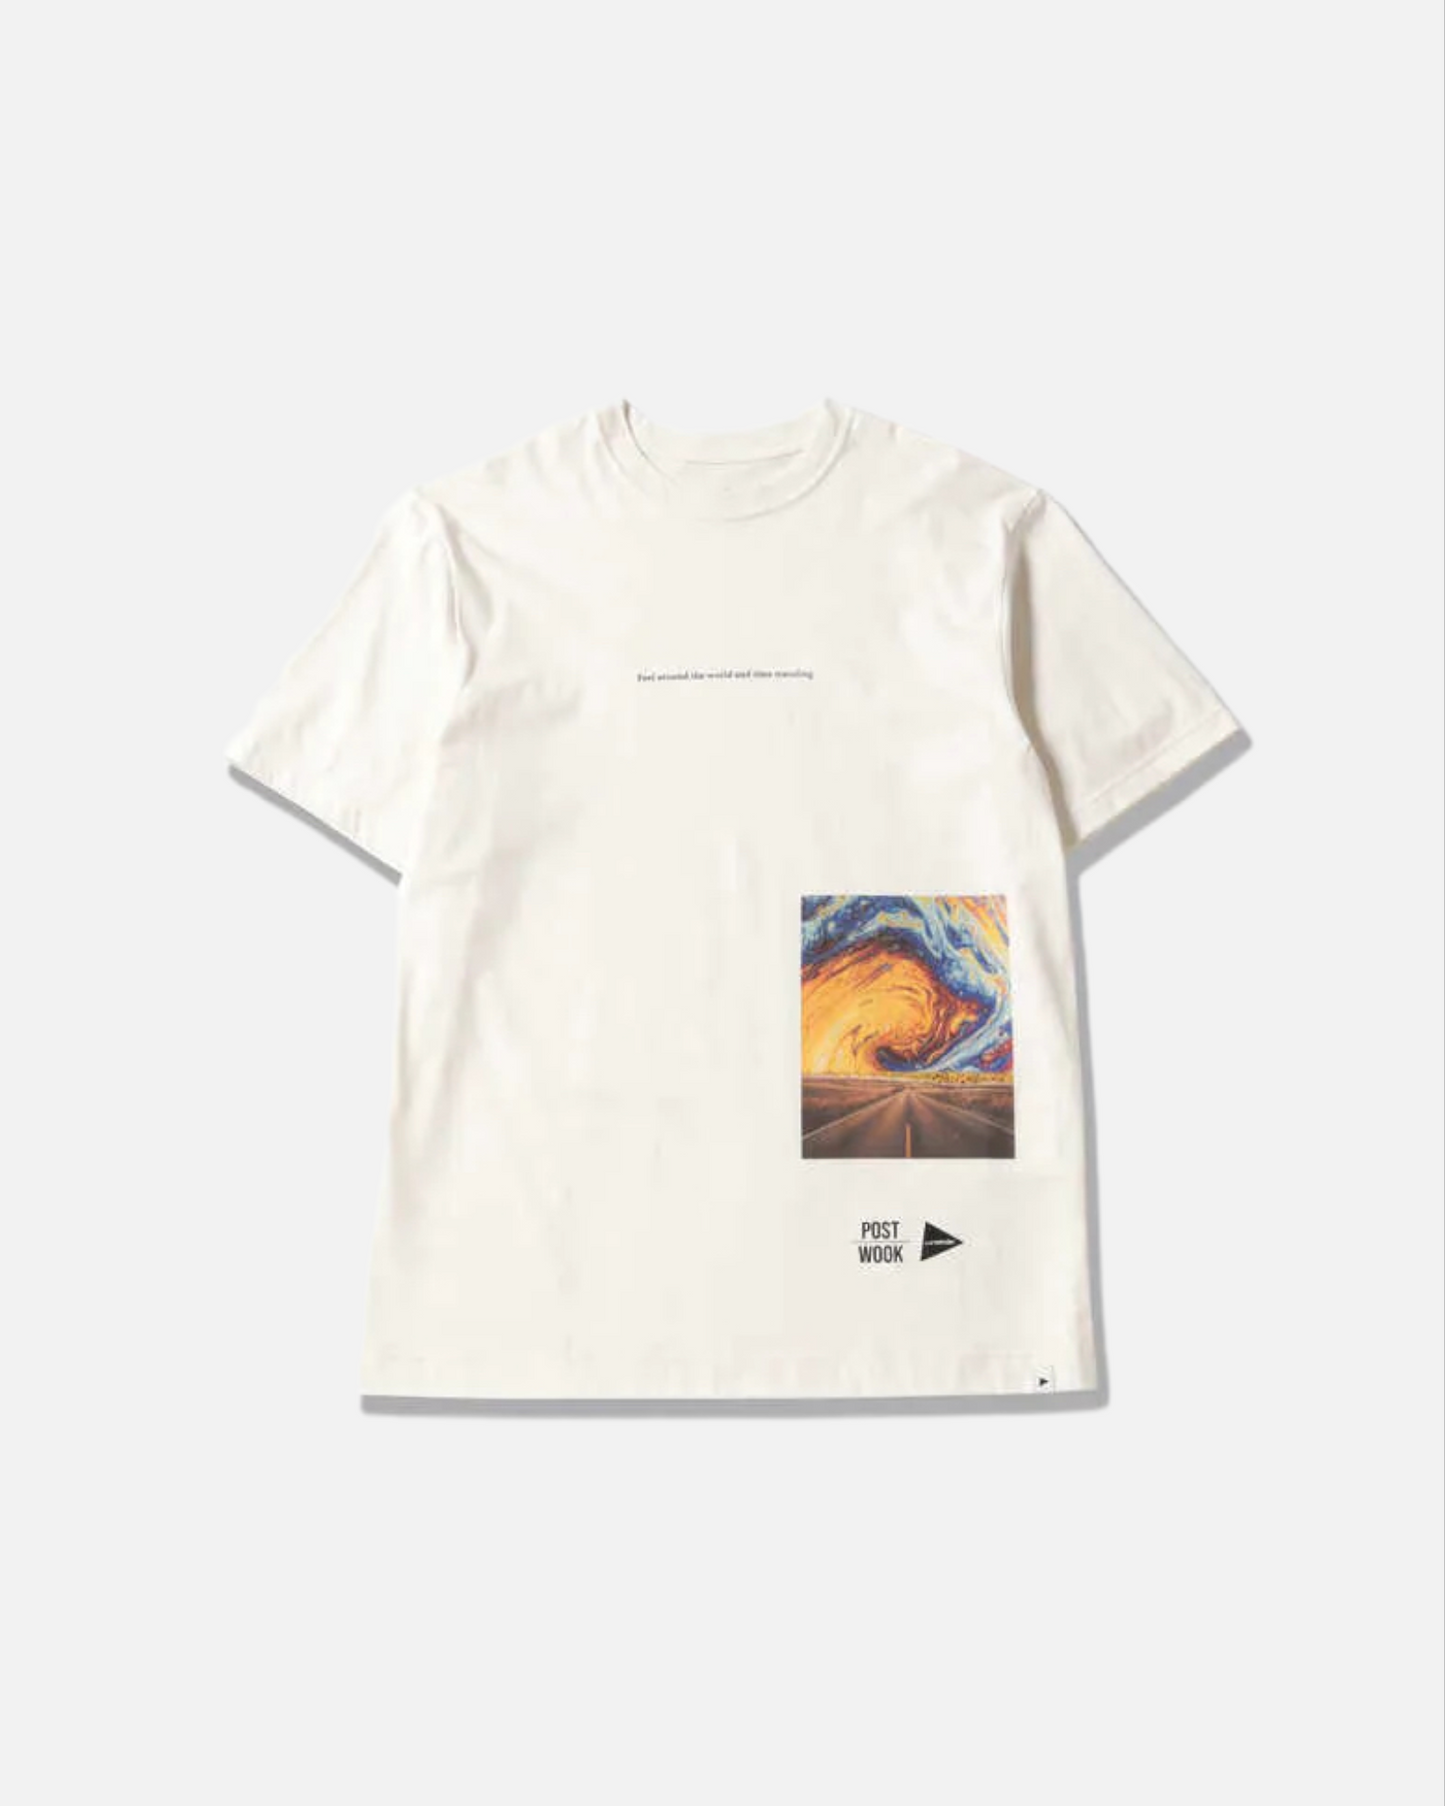 AND WANDER SOUL MEETS BODY T  BY POSTWORK (OFF WHITE)